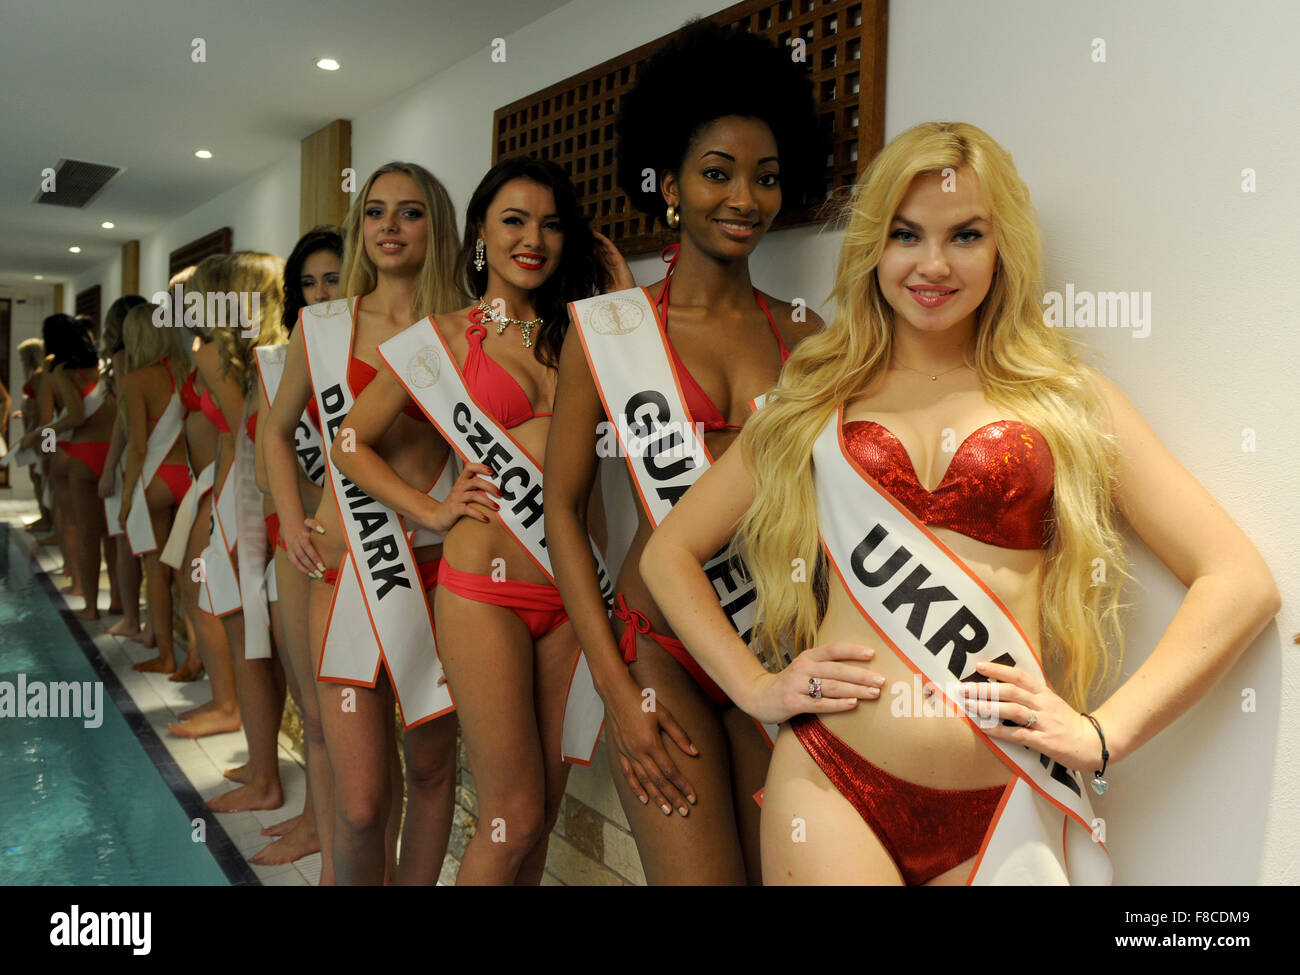 Dazia Sheibo of Ukraine (R-L), Saida Nineth Jeronimo of Guadeloupe, Veronika Thielowa of the Czech Republic and Amalie Nygaard of Denmark, who will compete for the 'Miss Intercontinental 2015' title on 18 December, pose at a hotel swimming pool in Bremen, Germany, 08 December 2015. Women from 64 countries and five continents will be taking part in the beauty pageant. Photo: INGO WAGNER/dpa Stock Photo